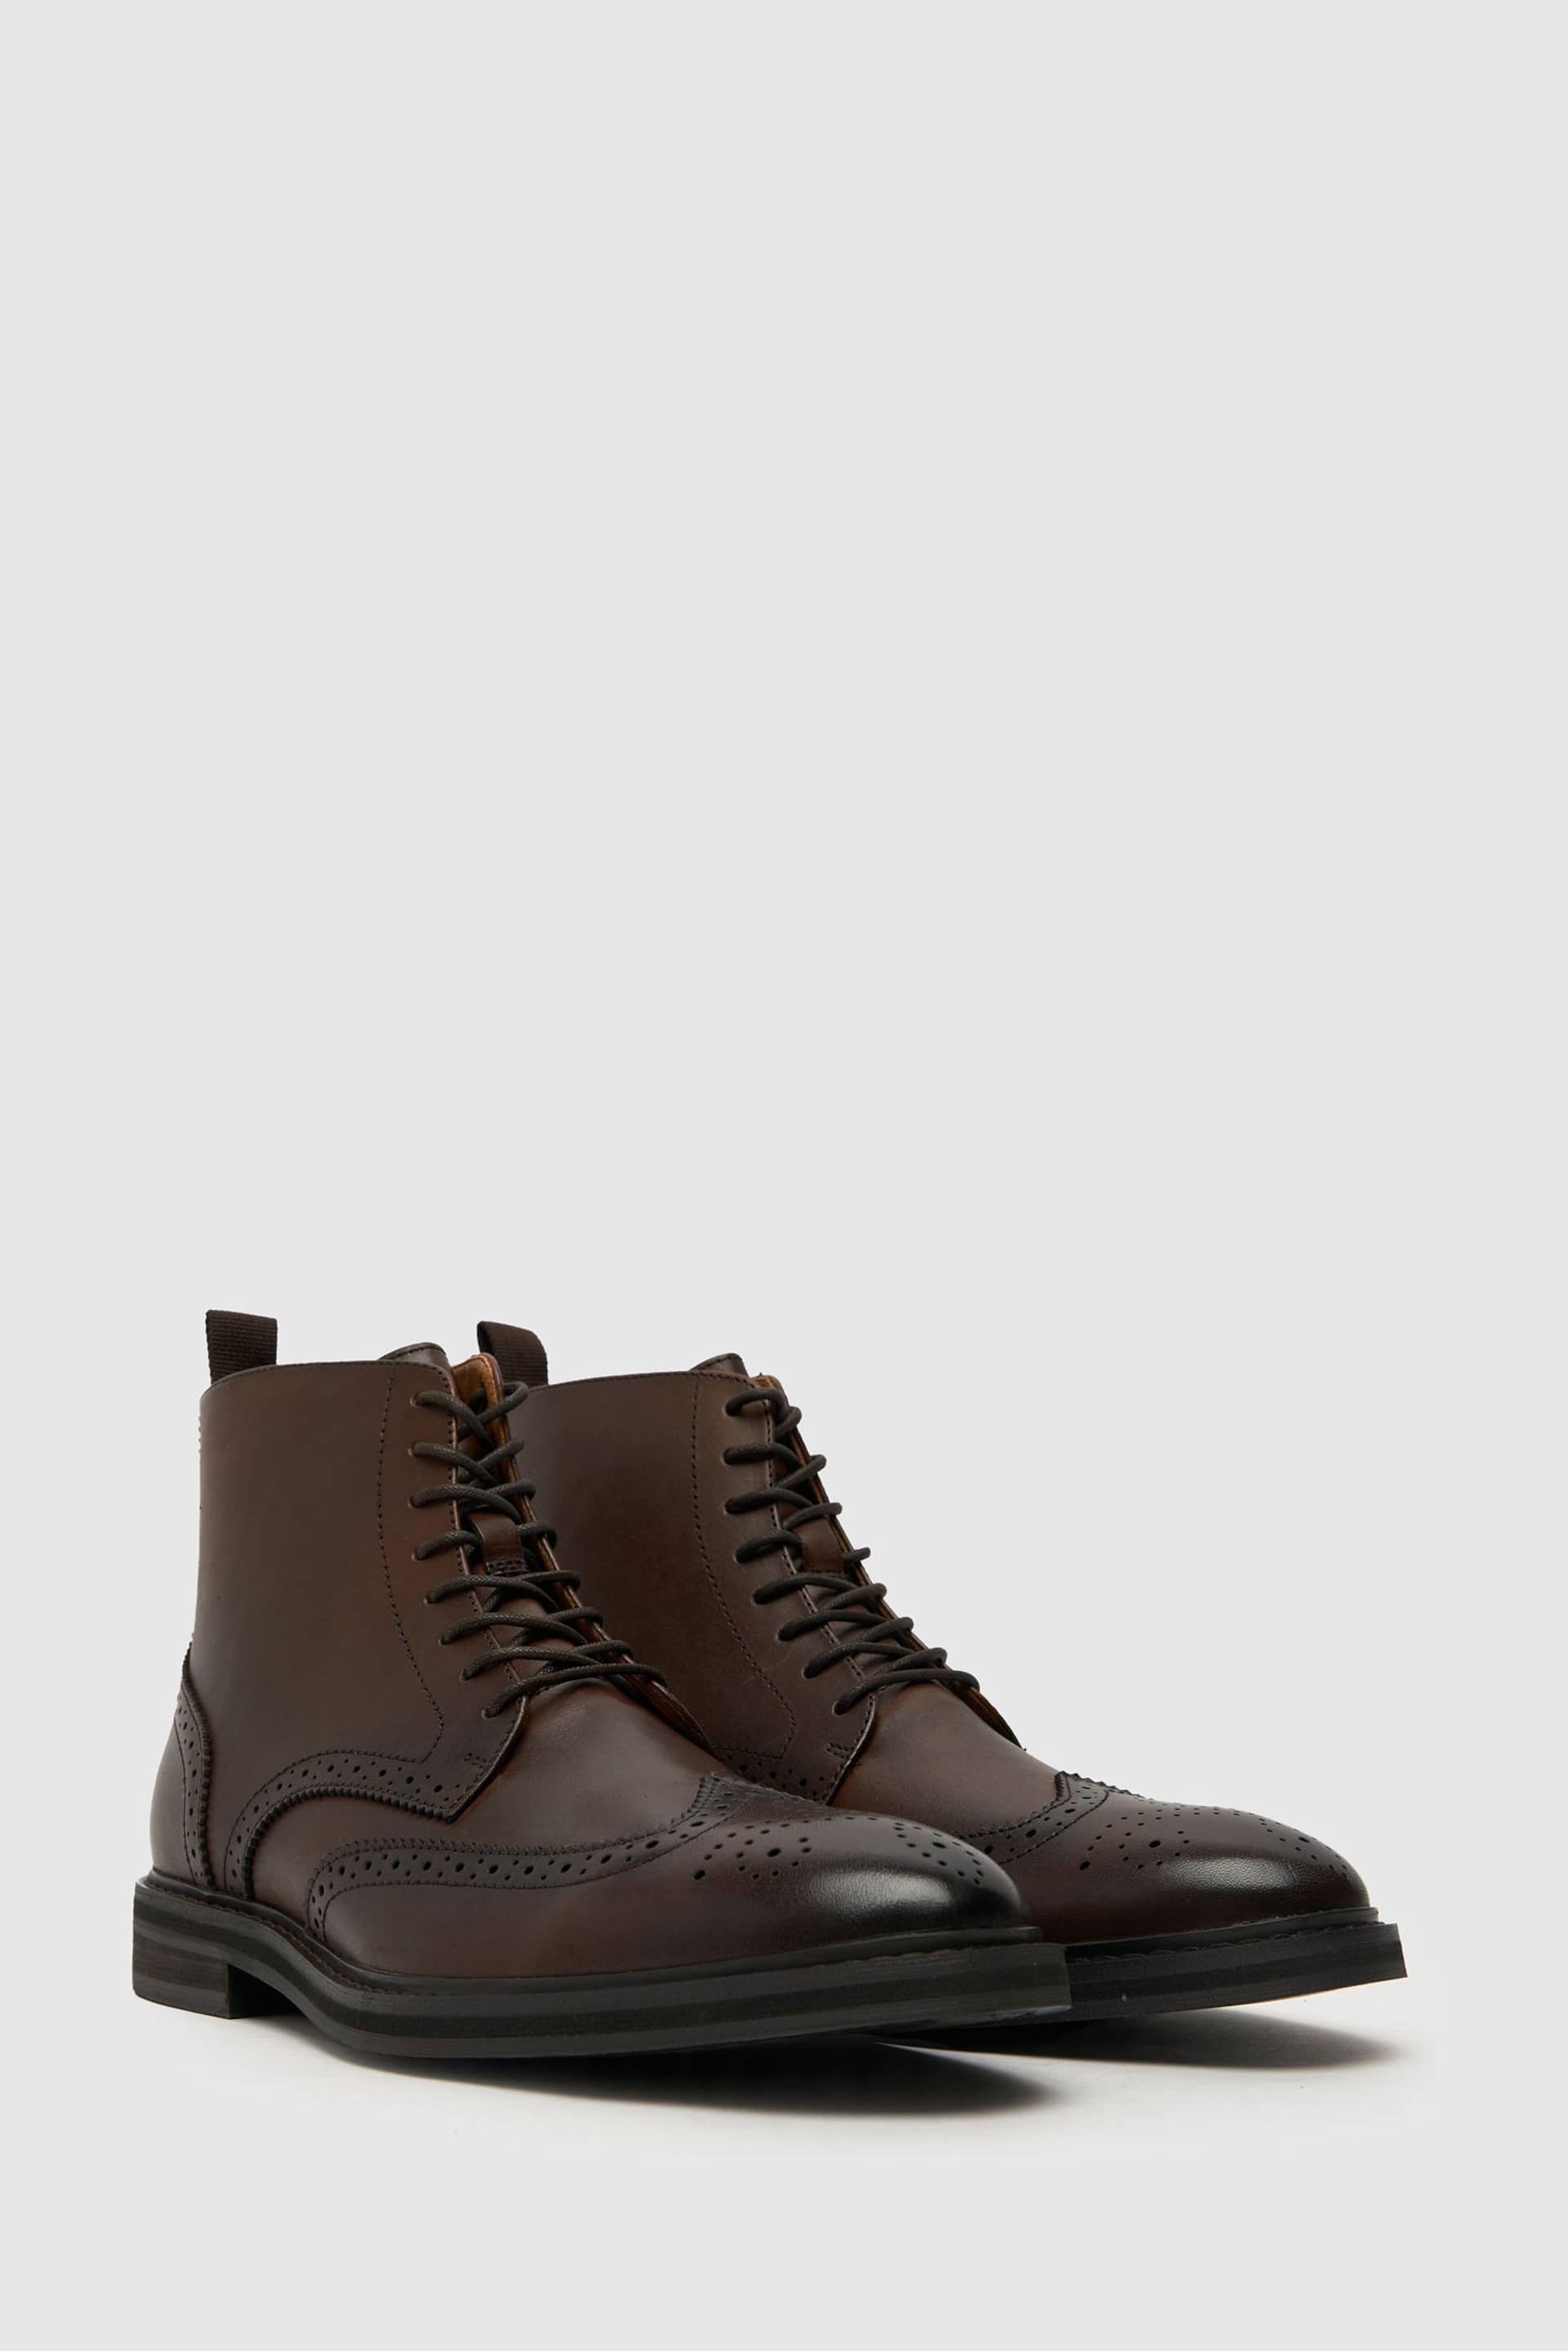 Schuh Draco Brogue Brown Boots - Image 2 of 4